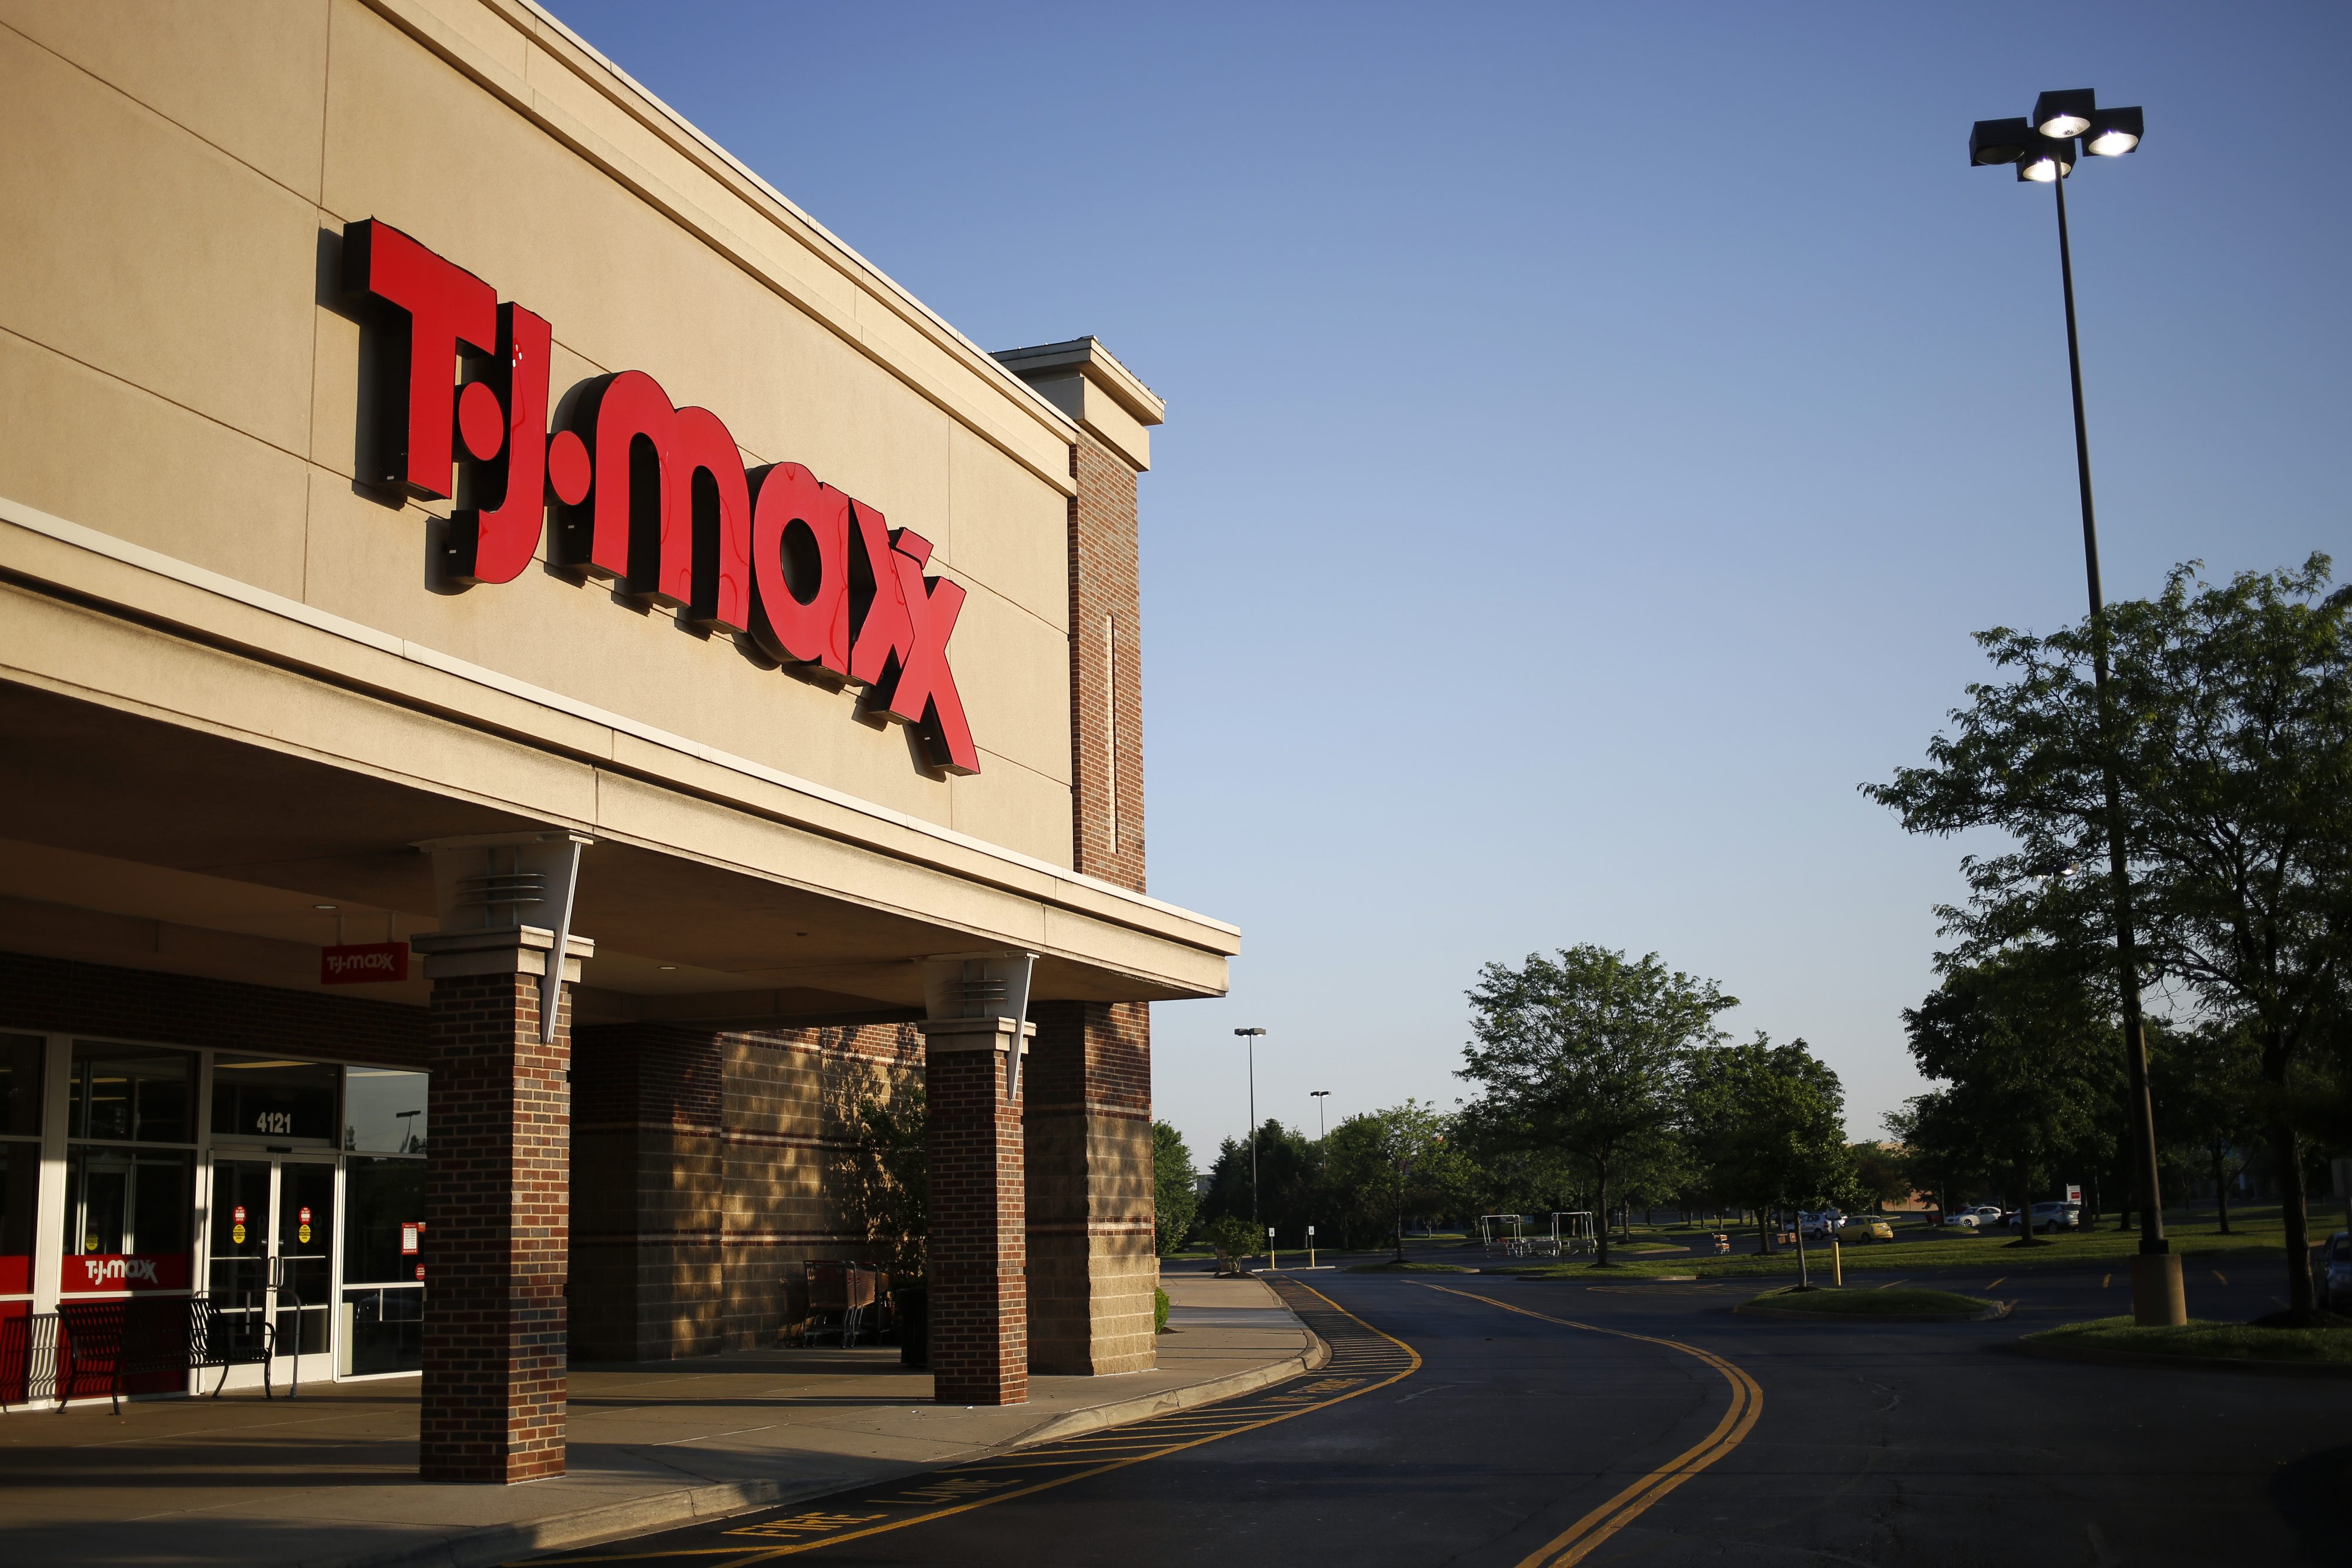 TJ Maxx, Marshalls, And Home Goods Stores Ahead Of The [f500link]TJX[/f500link] Cos. Earnings Figures